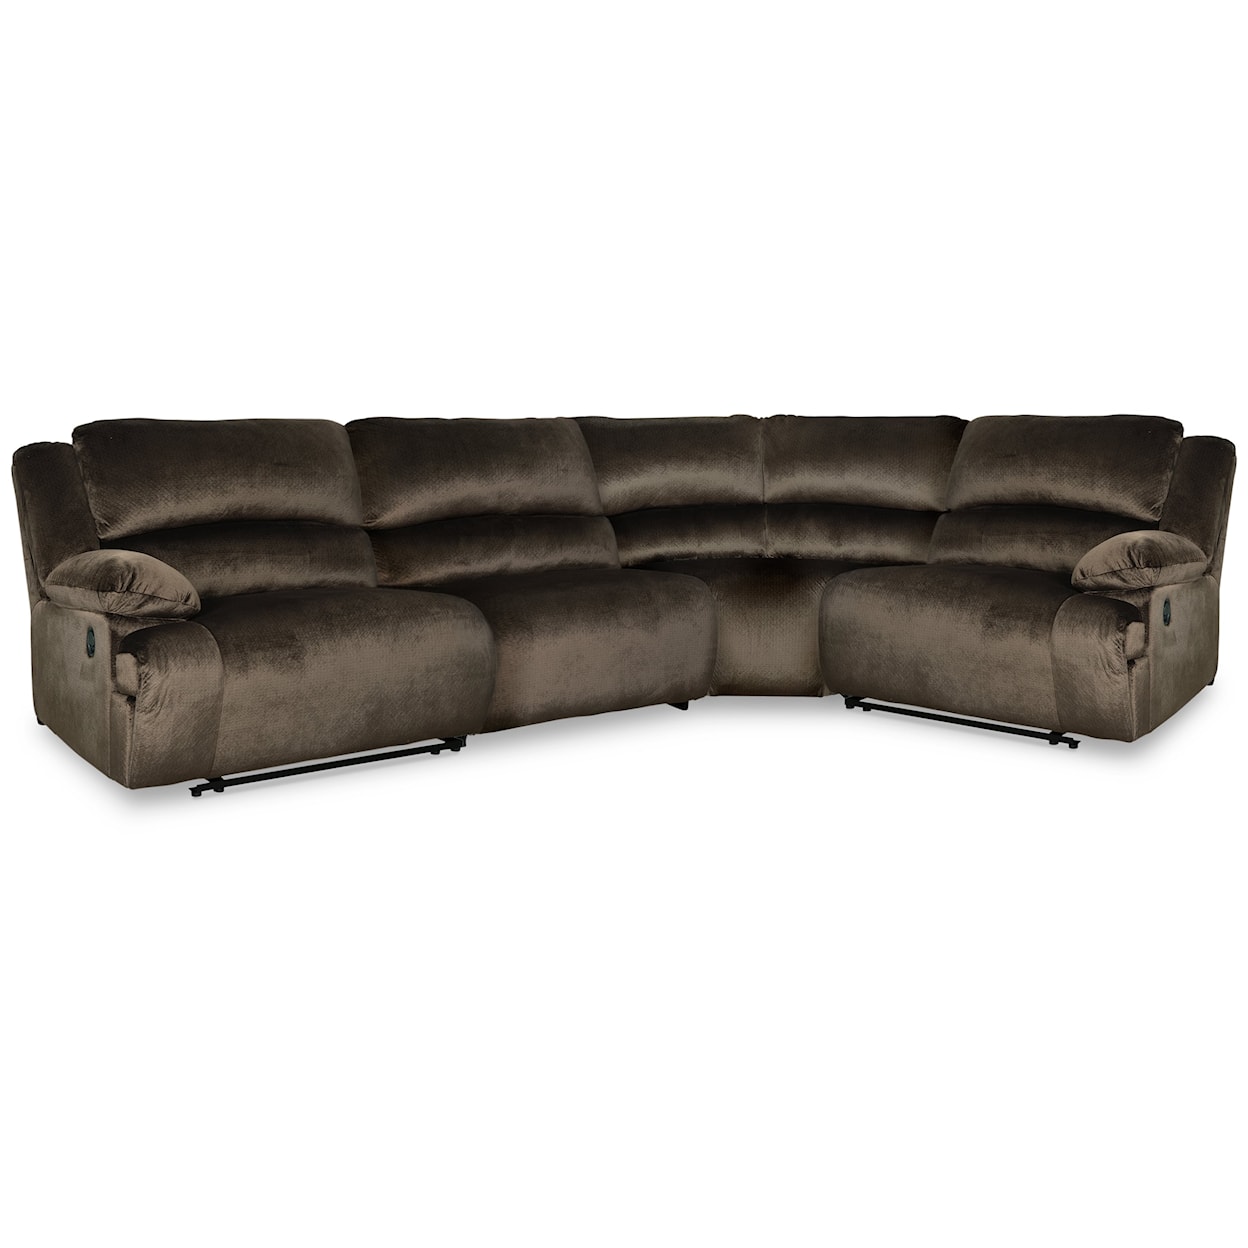 Signature Design by Ashley Furniture Clonmel Reclining Sectional